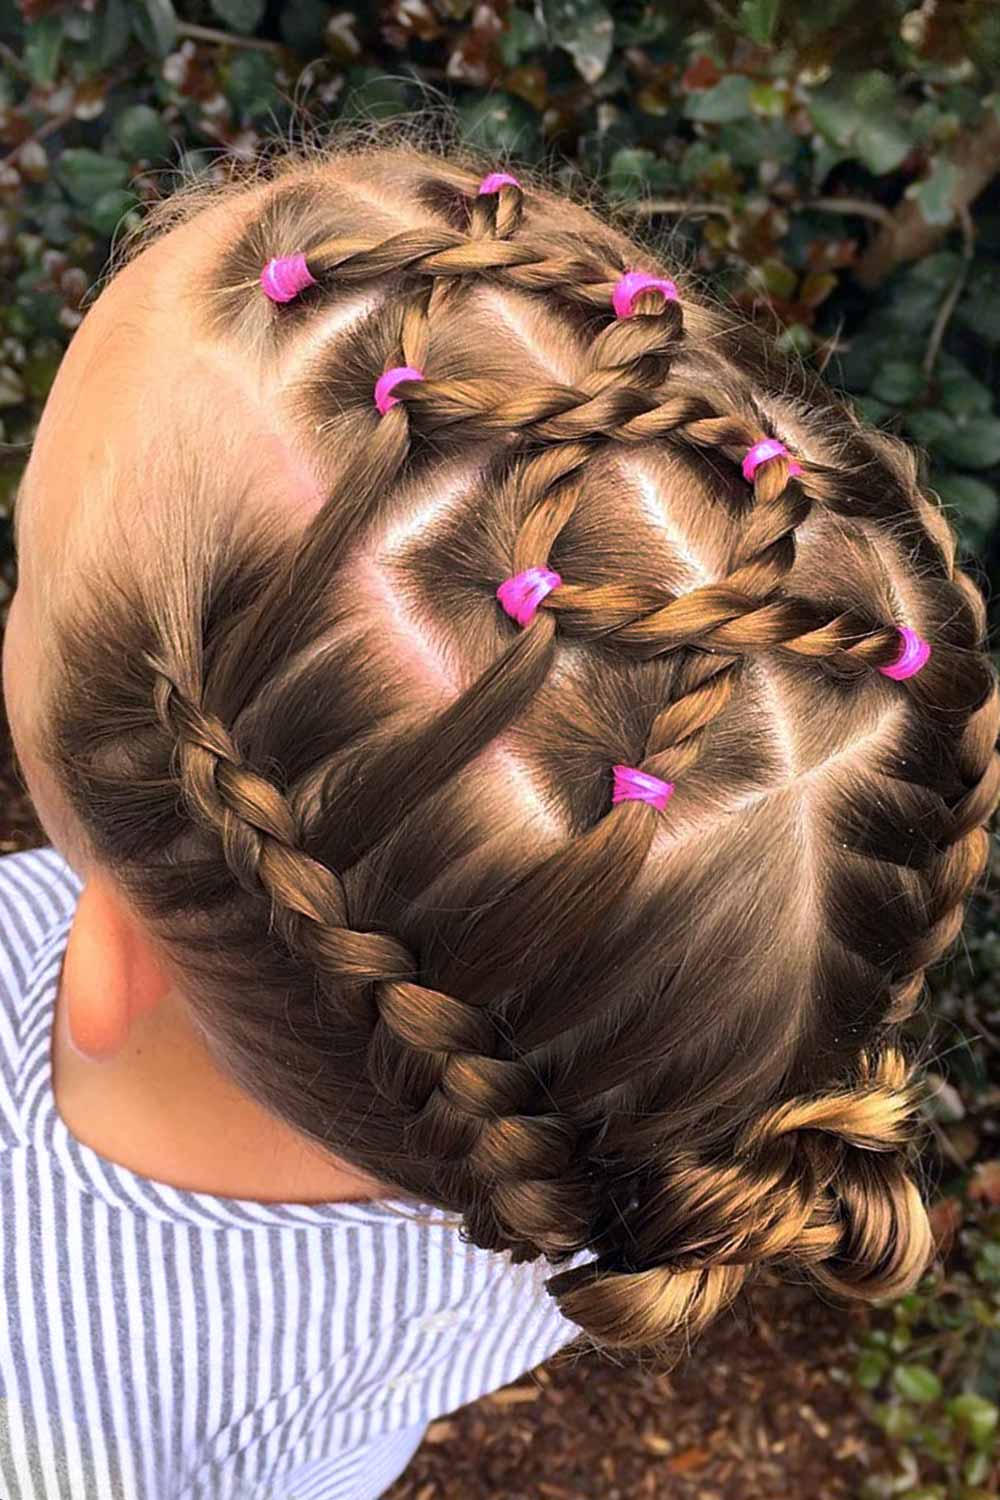 Updated] 44 Rubber Band Hairstyles To Level Up Your Look